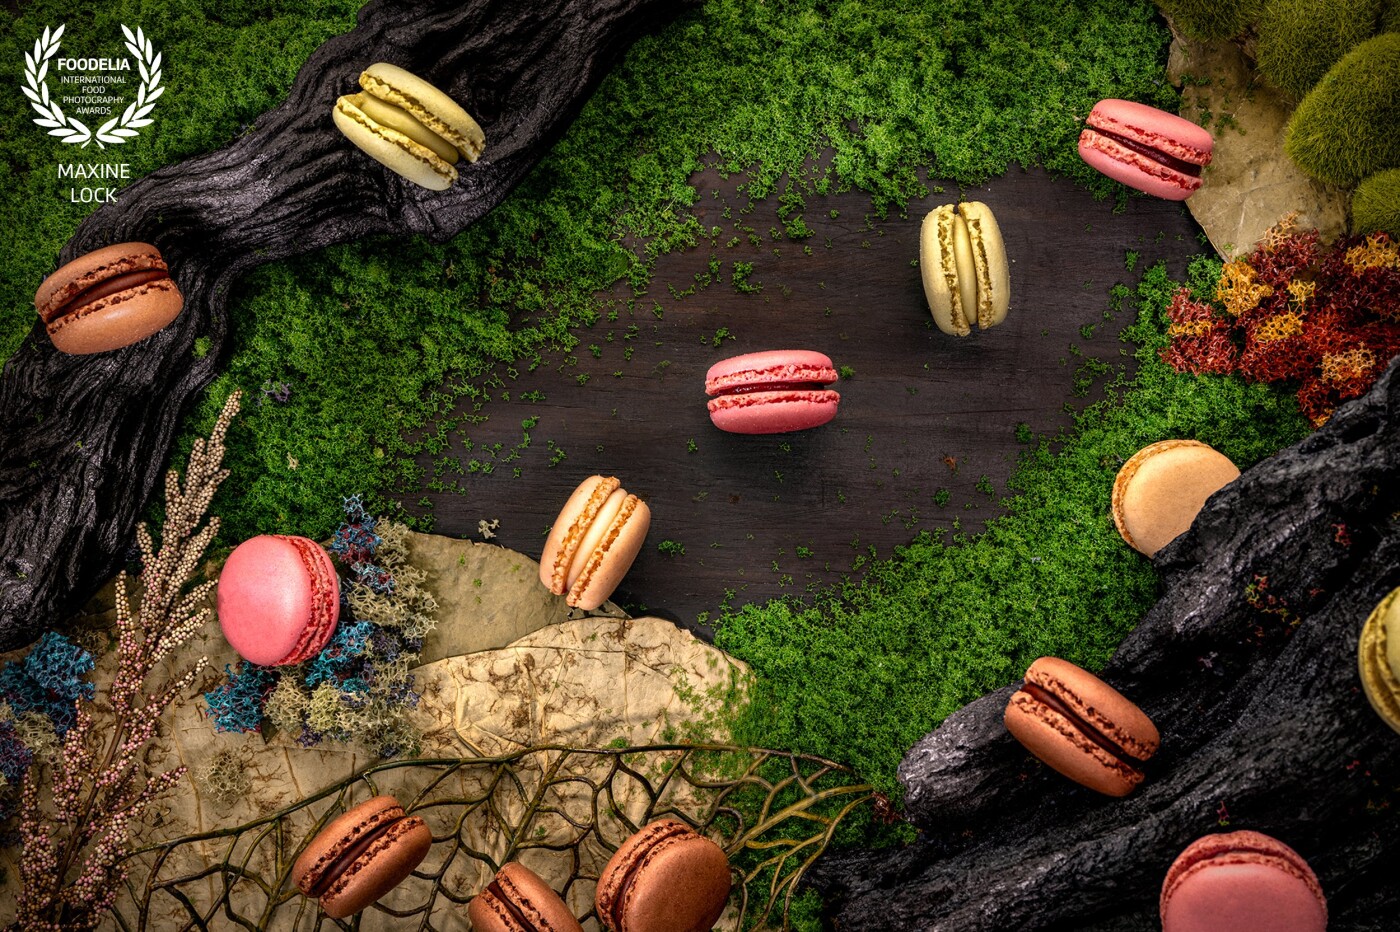 Different colours of Macarons in a logs & moss forest scene. Colours of the Macarons includes pink for strawberry flavours, white for peach, green for macha and brown for chocolate.